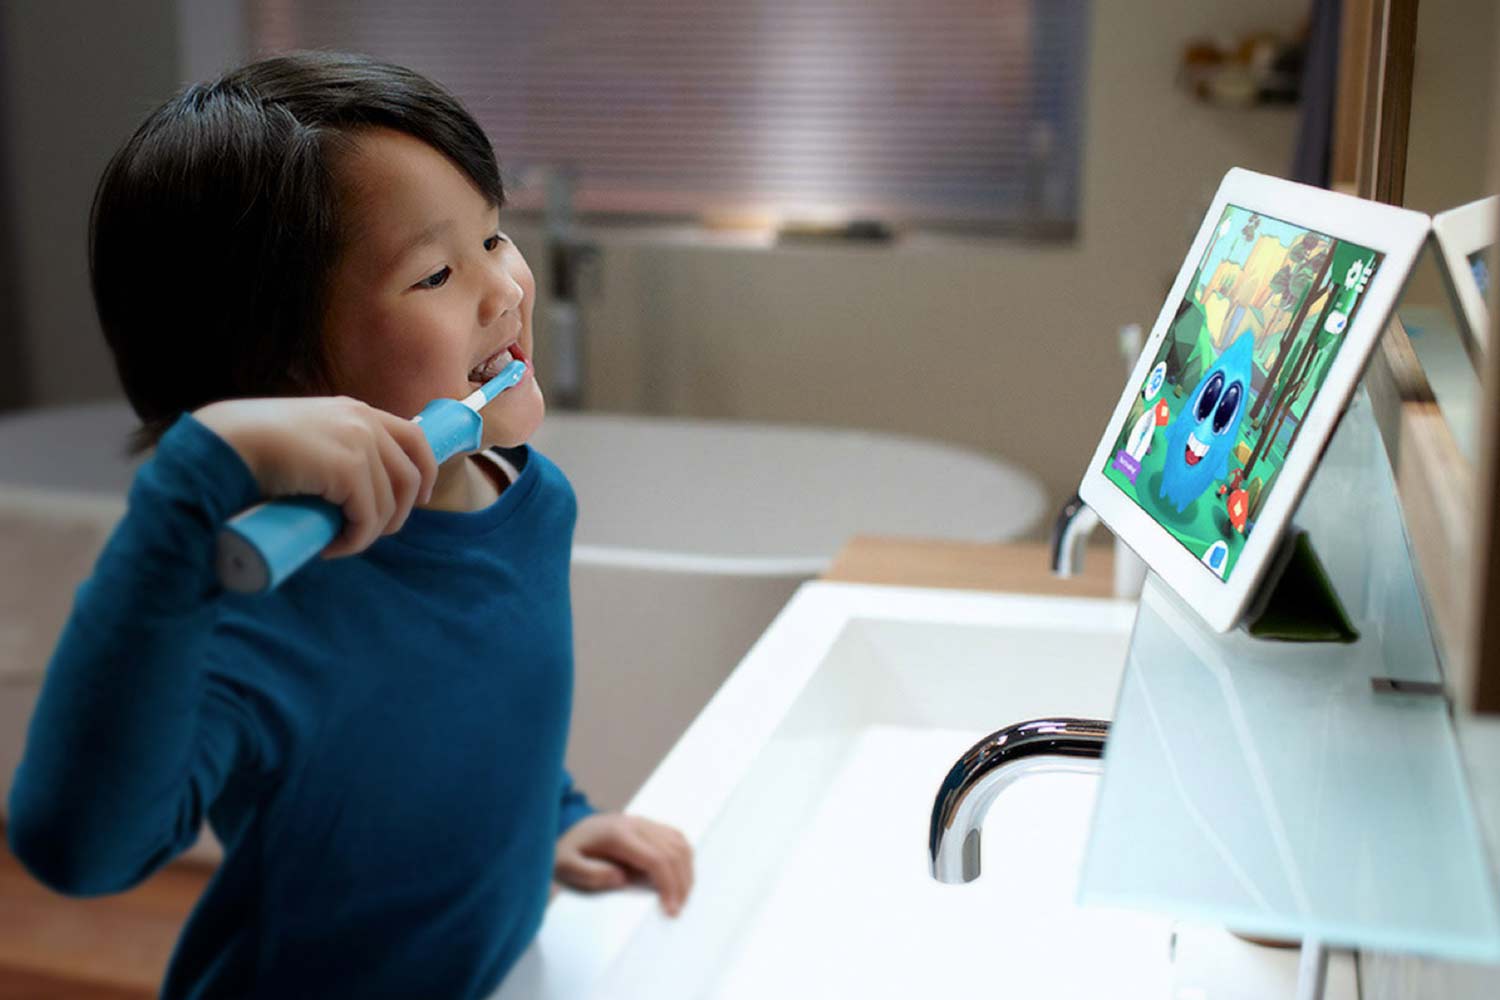 philips sonicare bluetooth toothbrush has a coaching app for kids connected usp4 03